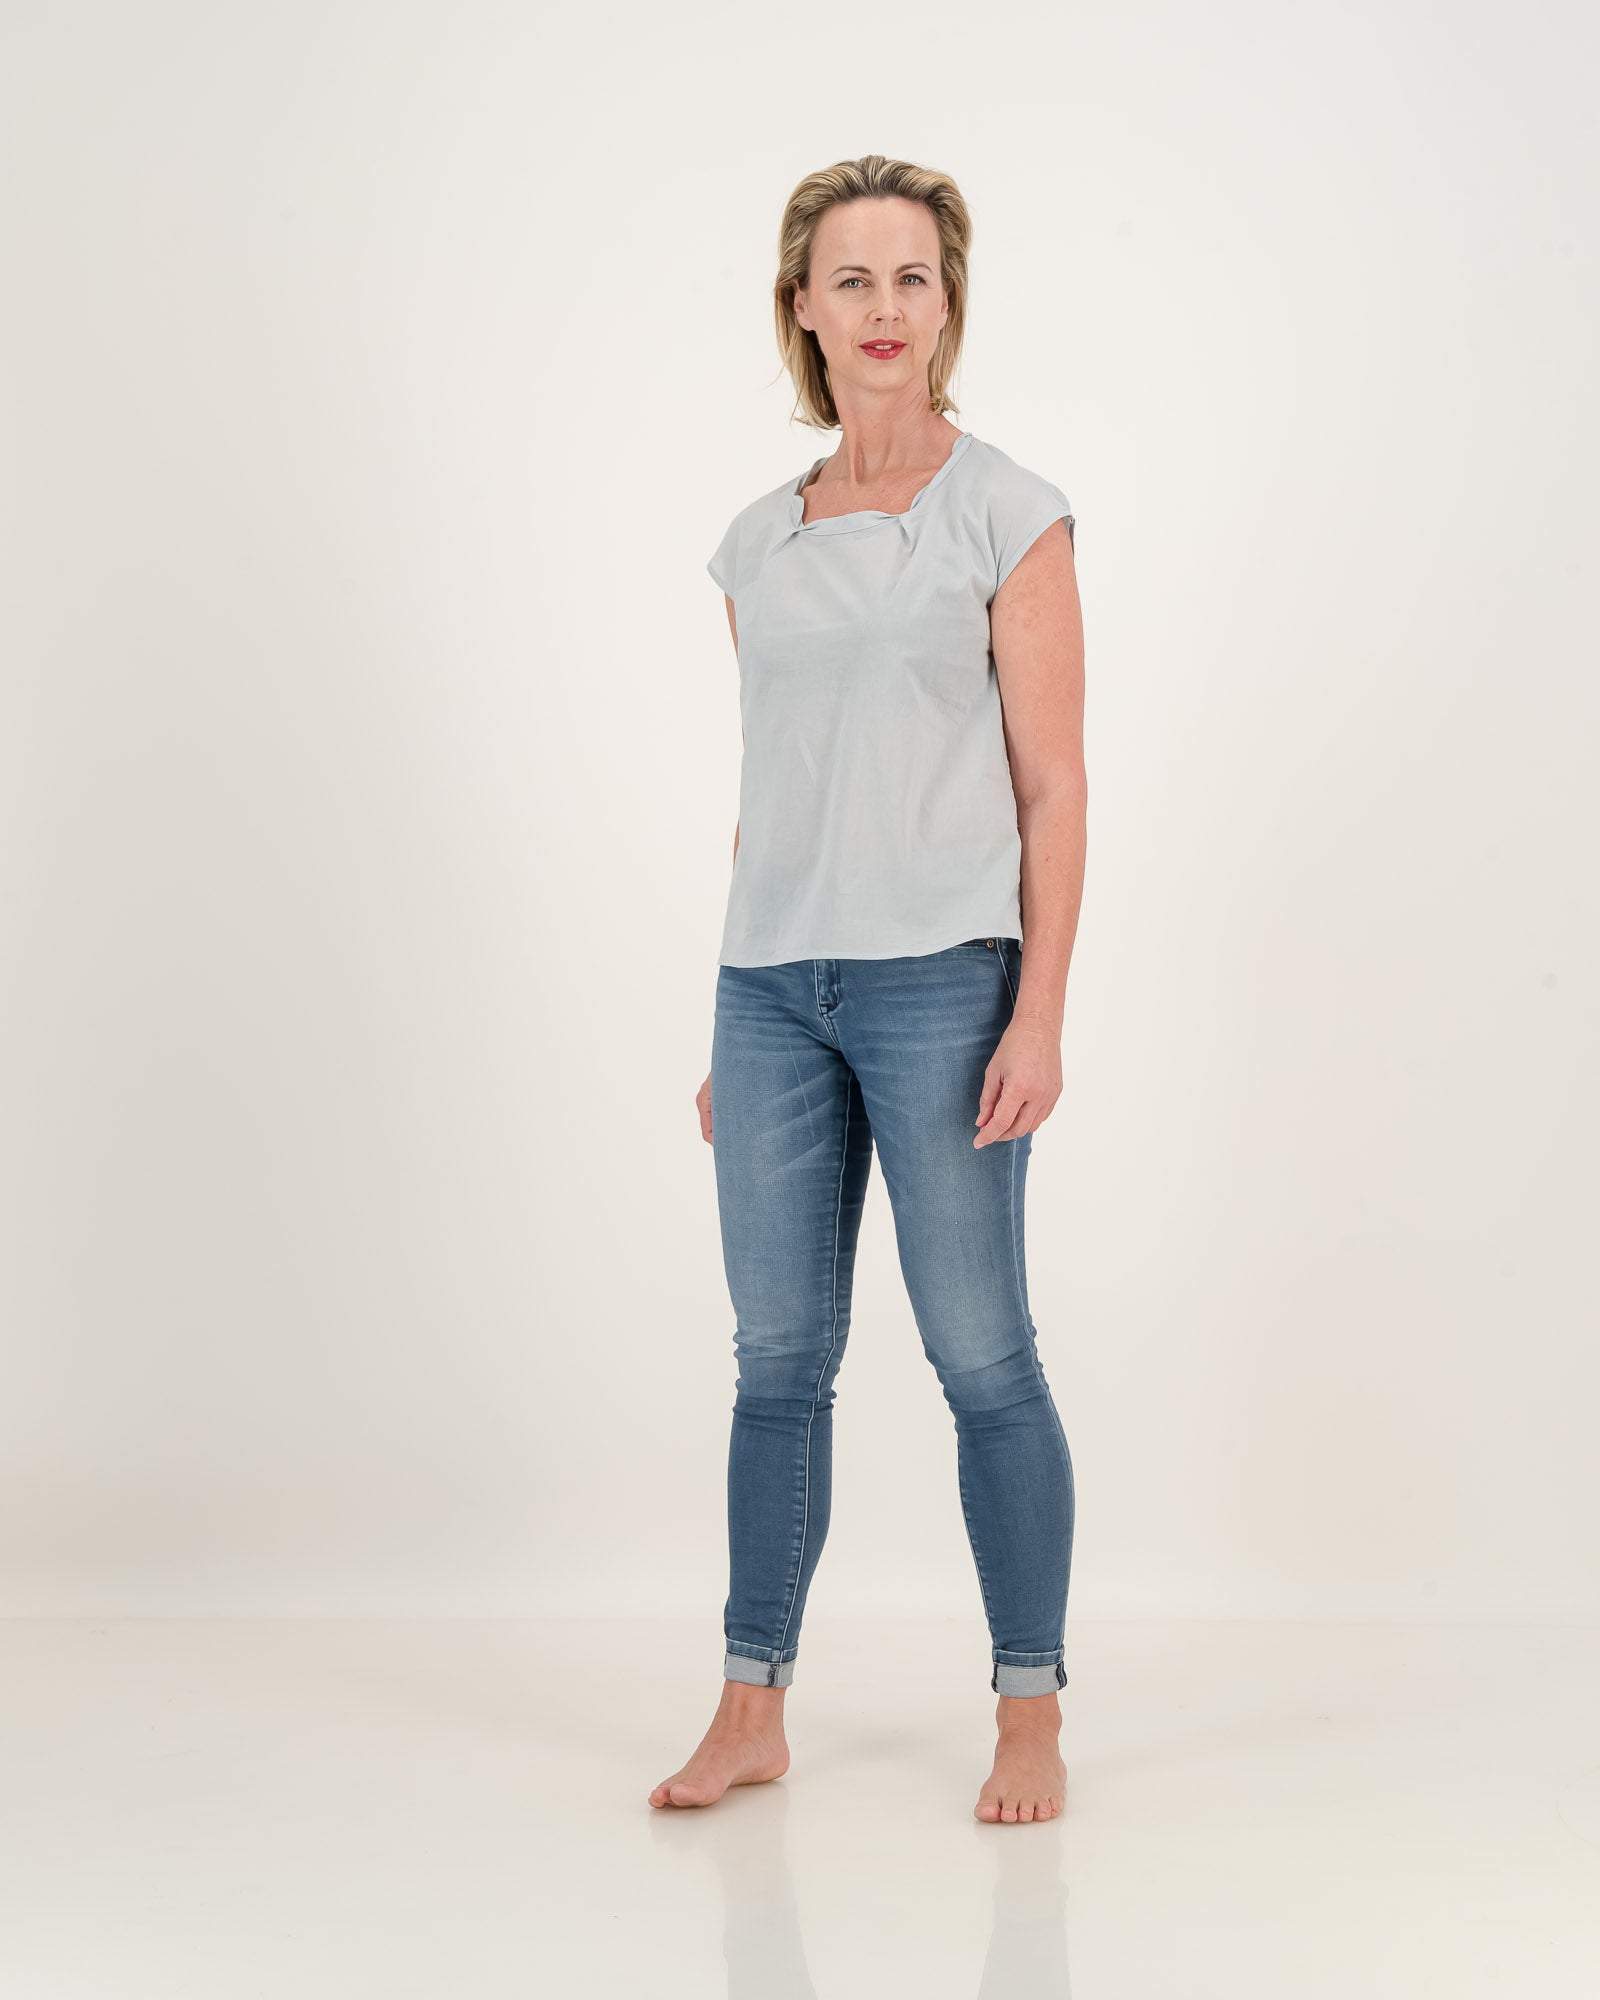 A woman wearing jeans and a subtle blue top. The top has a pleated neckline, adding elegance to its relaxed style. Stay cool and stylish in this lightweight cotton essential.